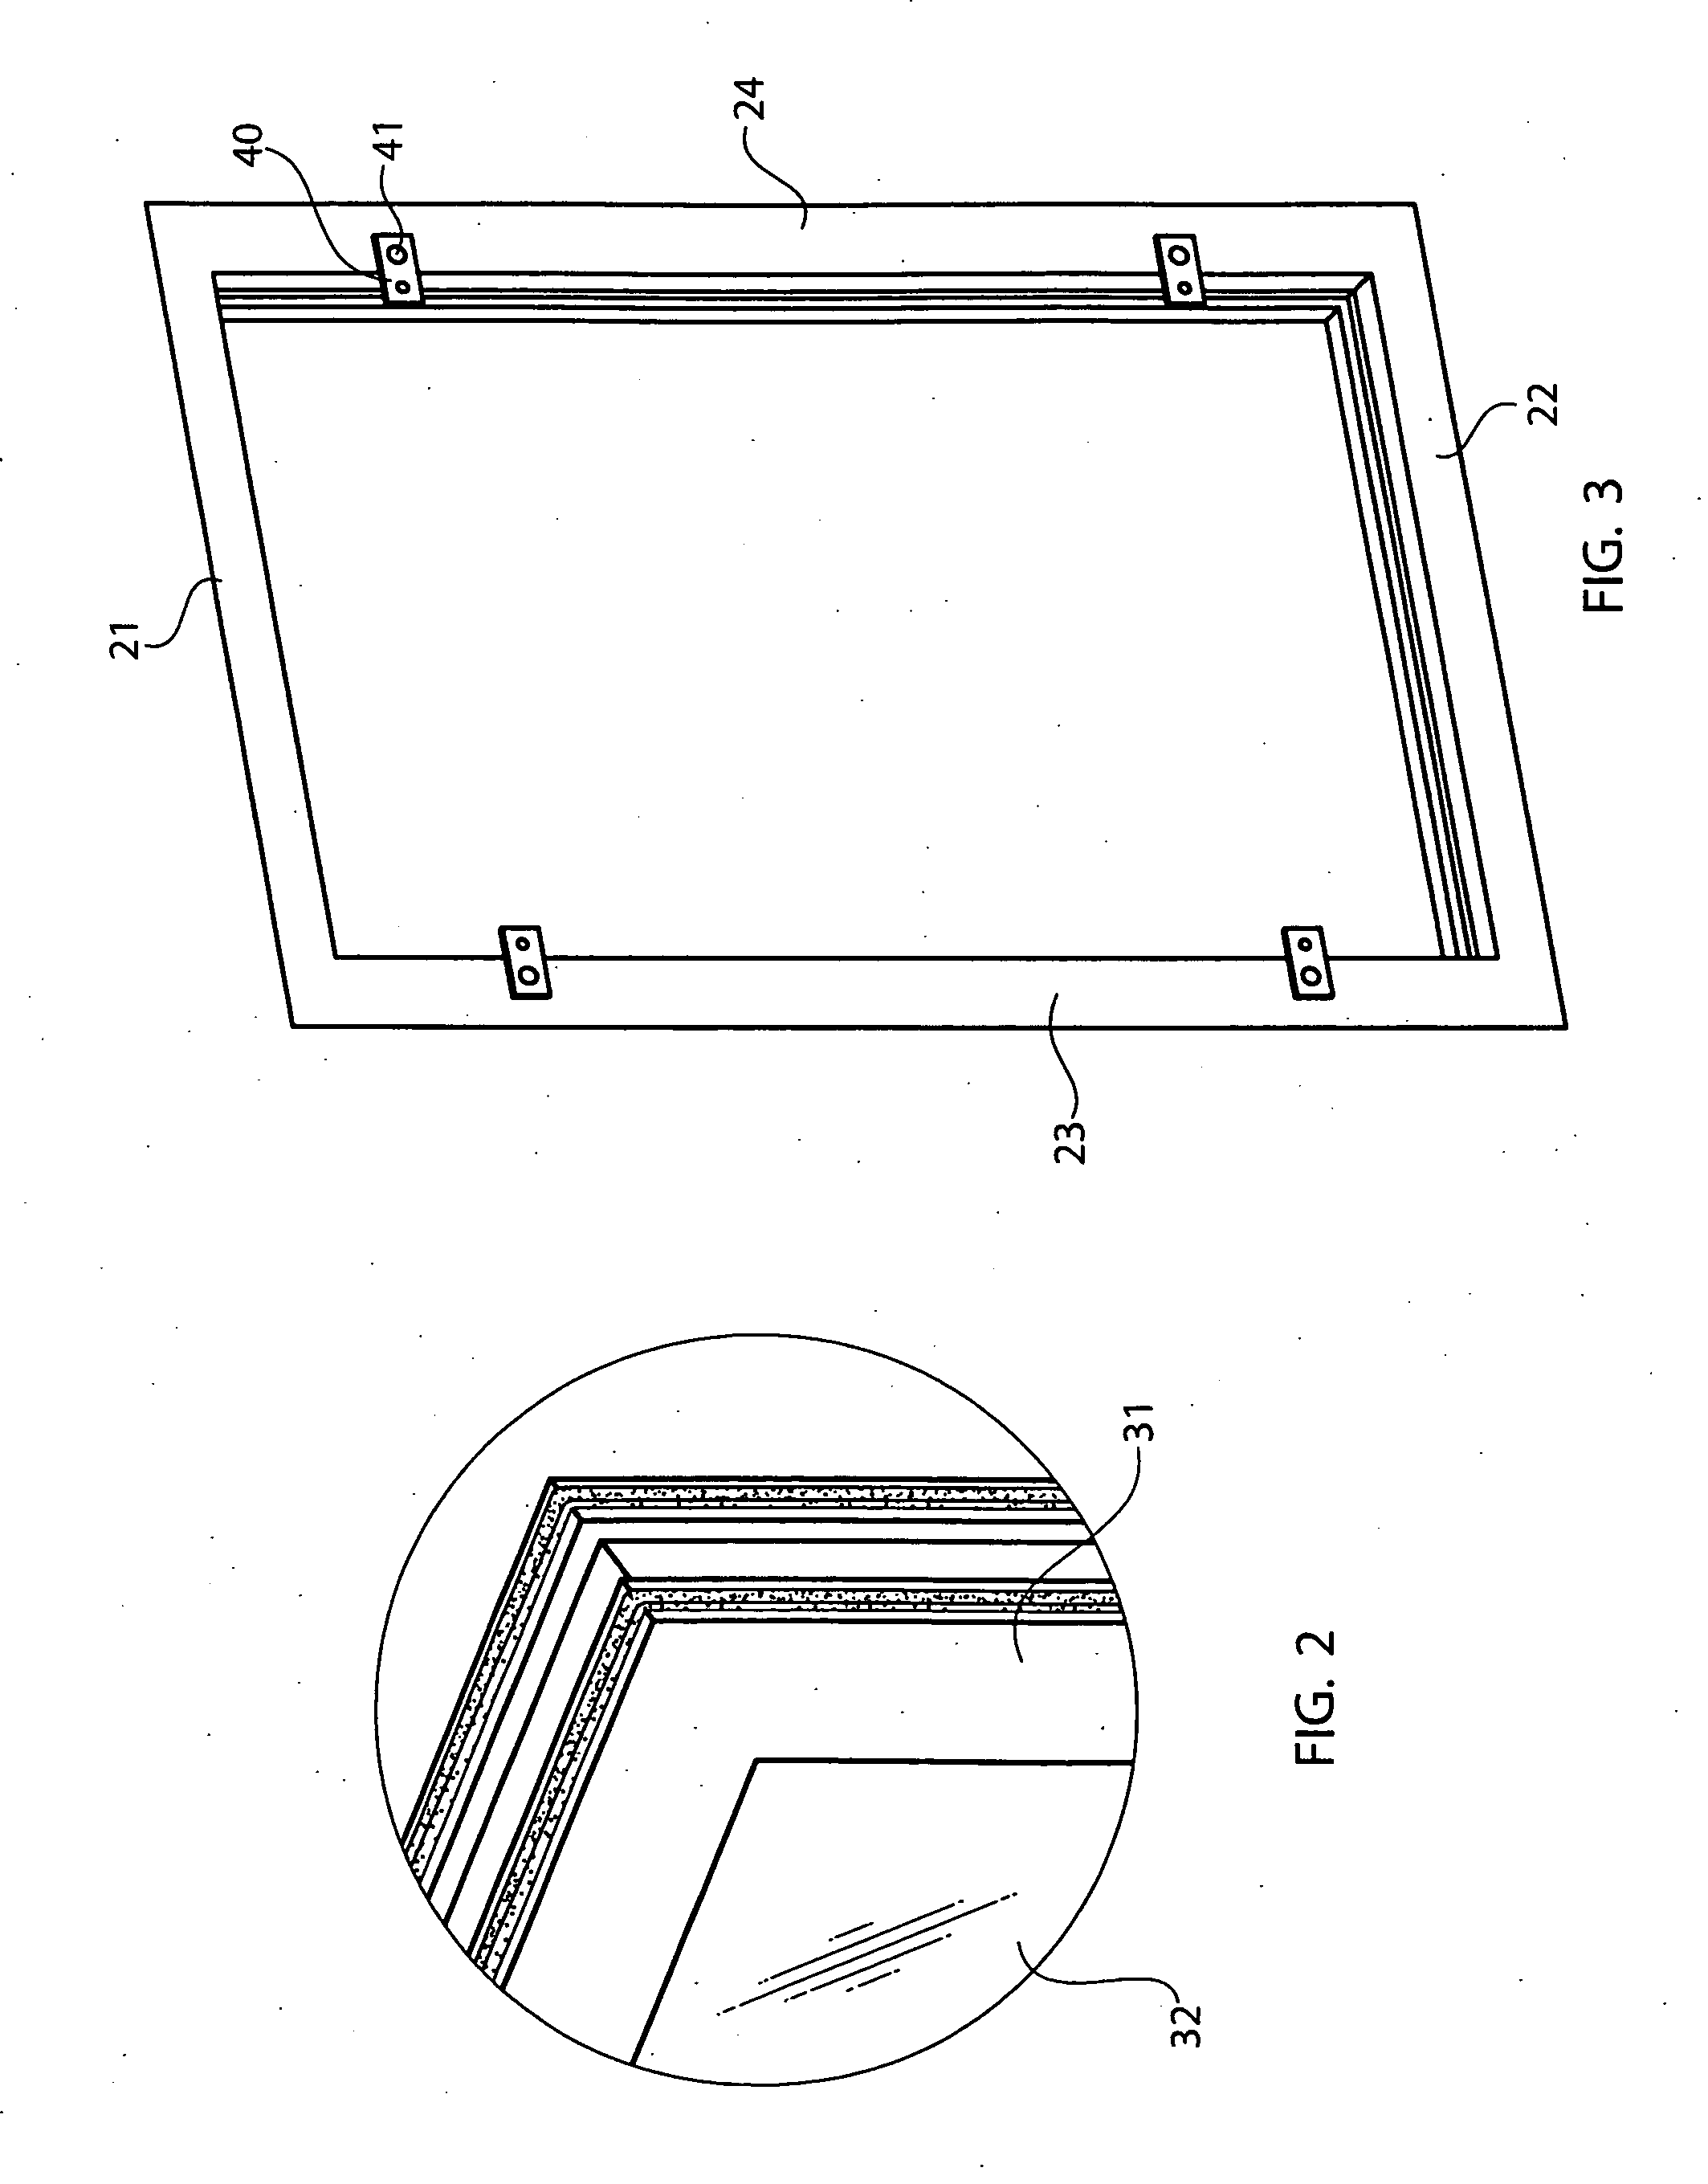 Interior storm window and method for attaching same